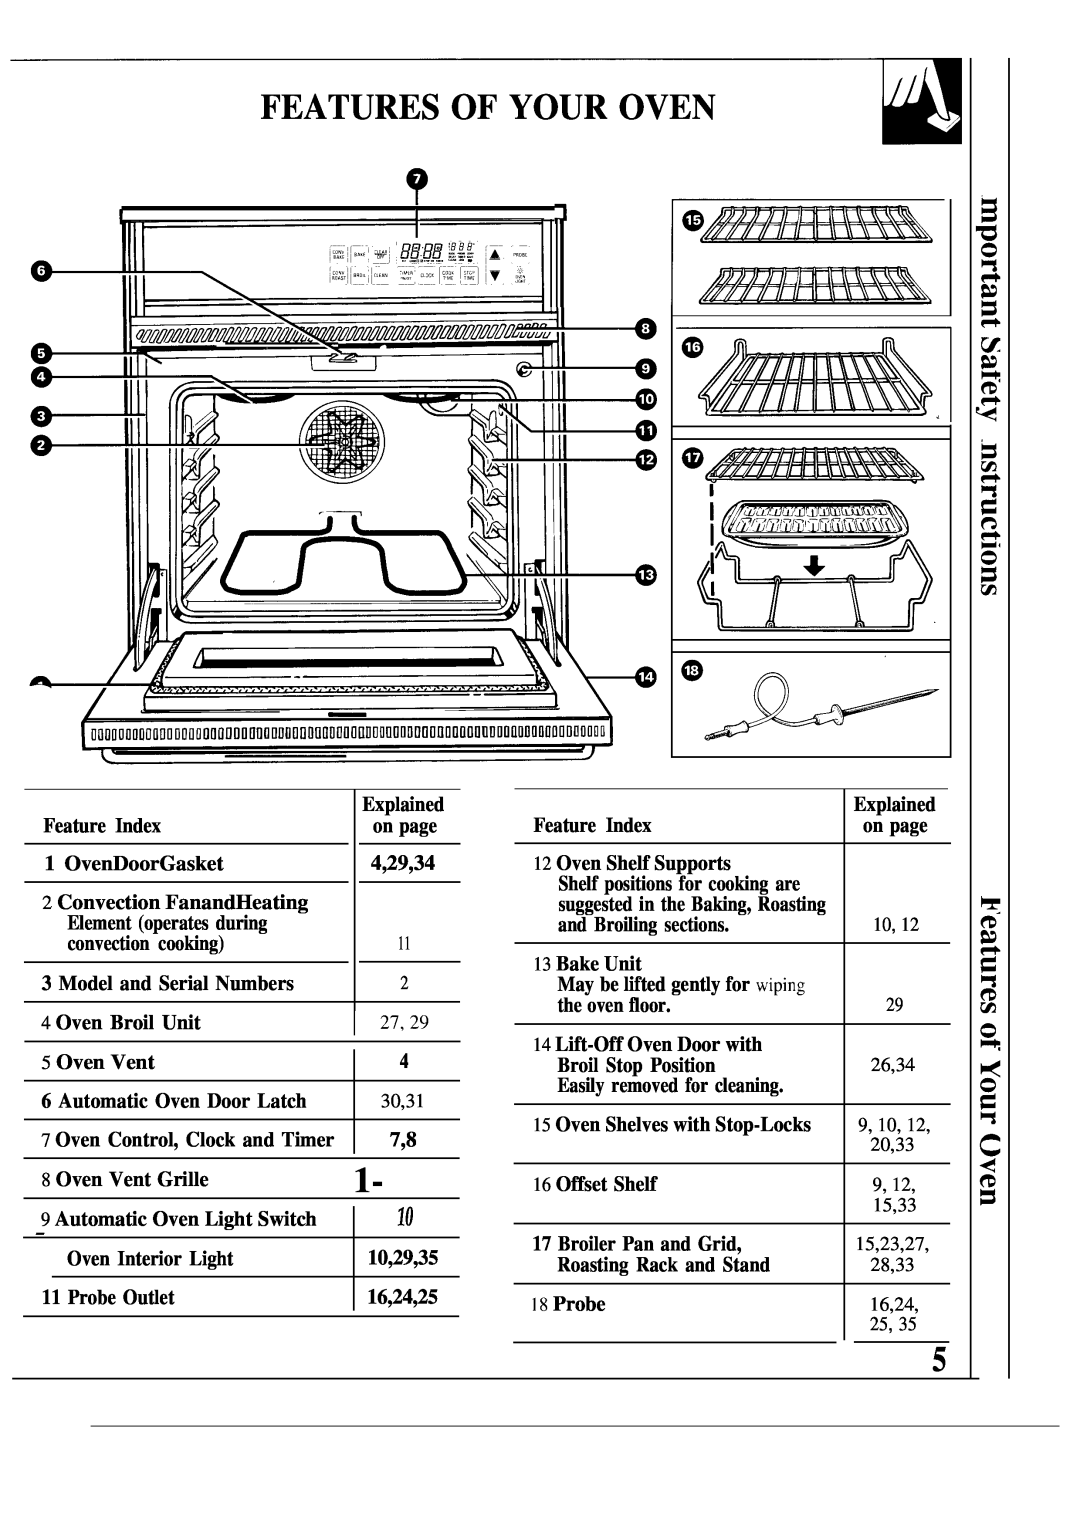 GE MNU099, JKP17 warranty Features Of Your Oven 